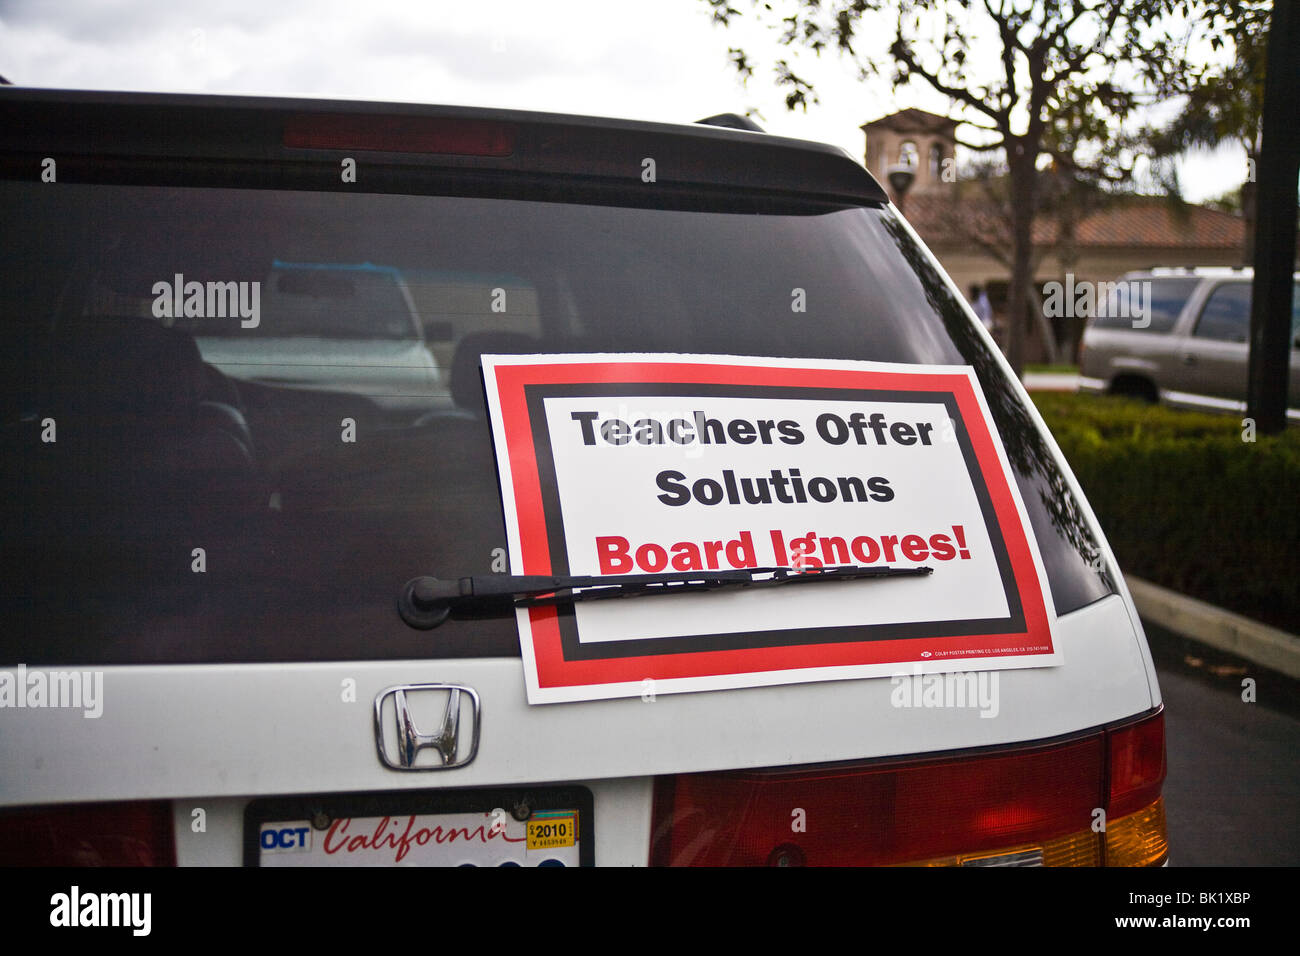 Vehicle in school parking lot displays poster showing teacher dissatisfaction with school board policy. Stock Photo